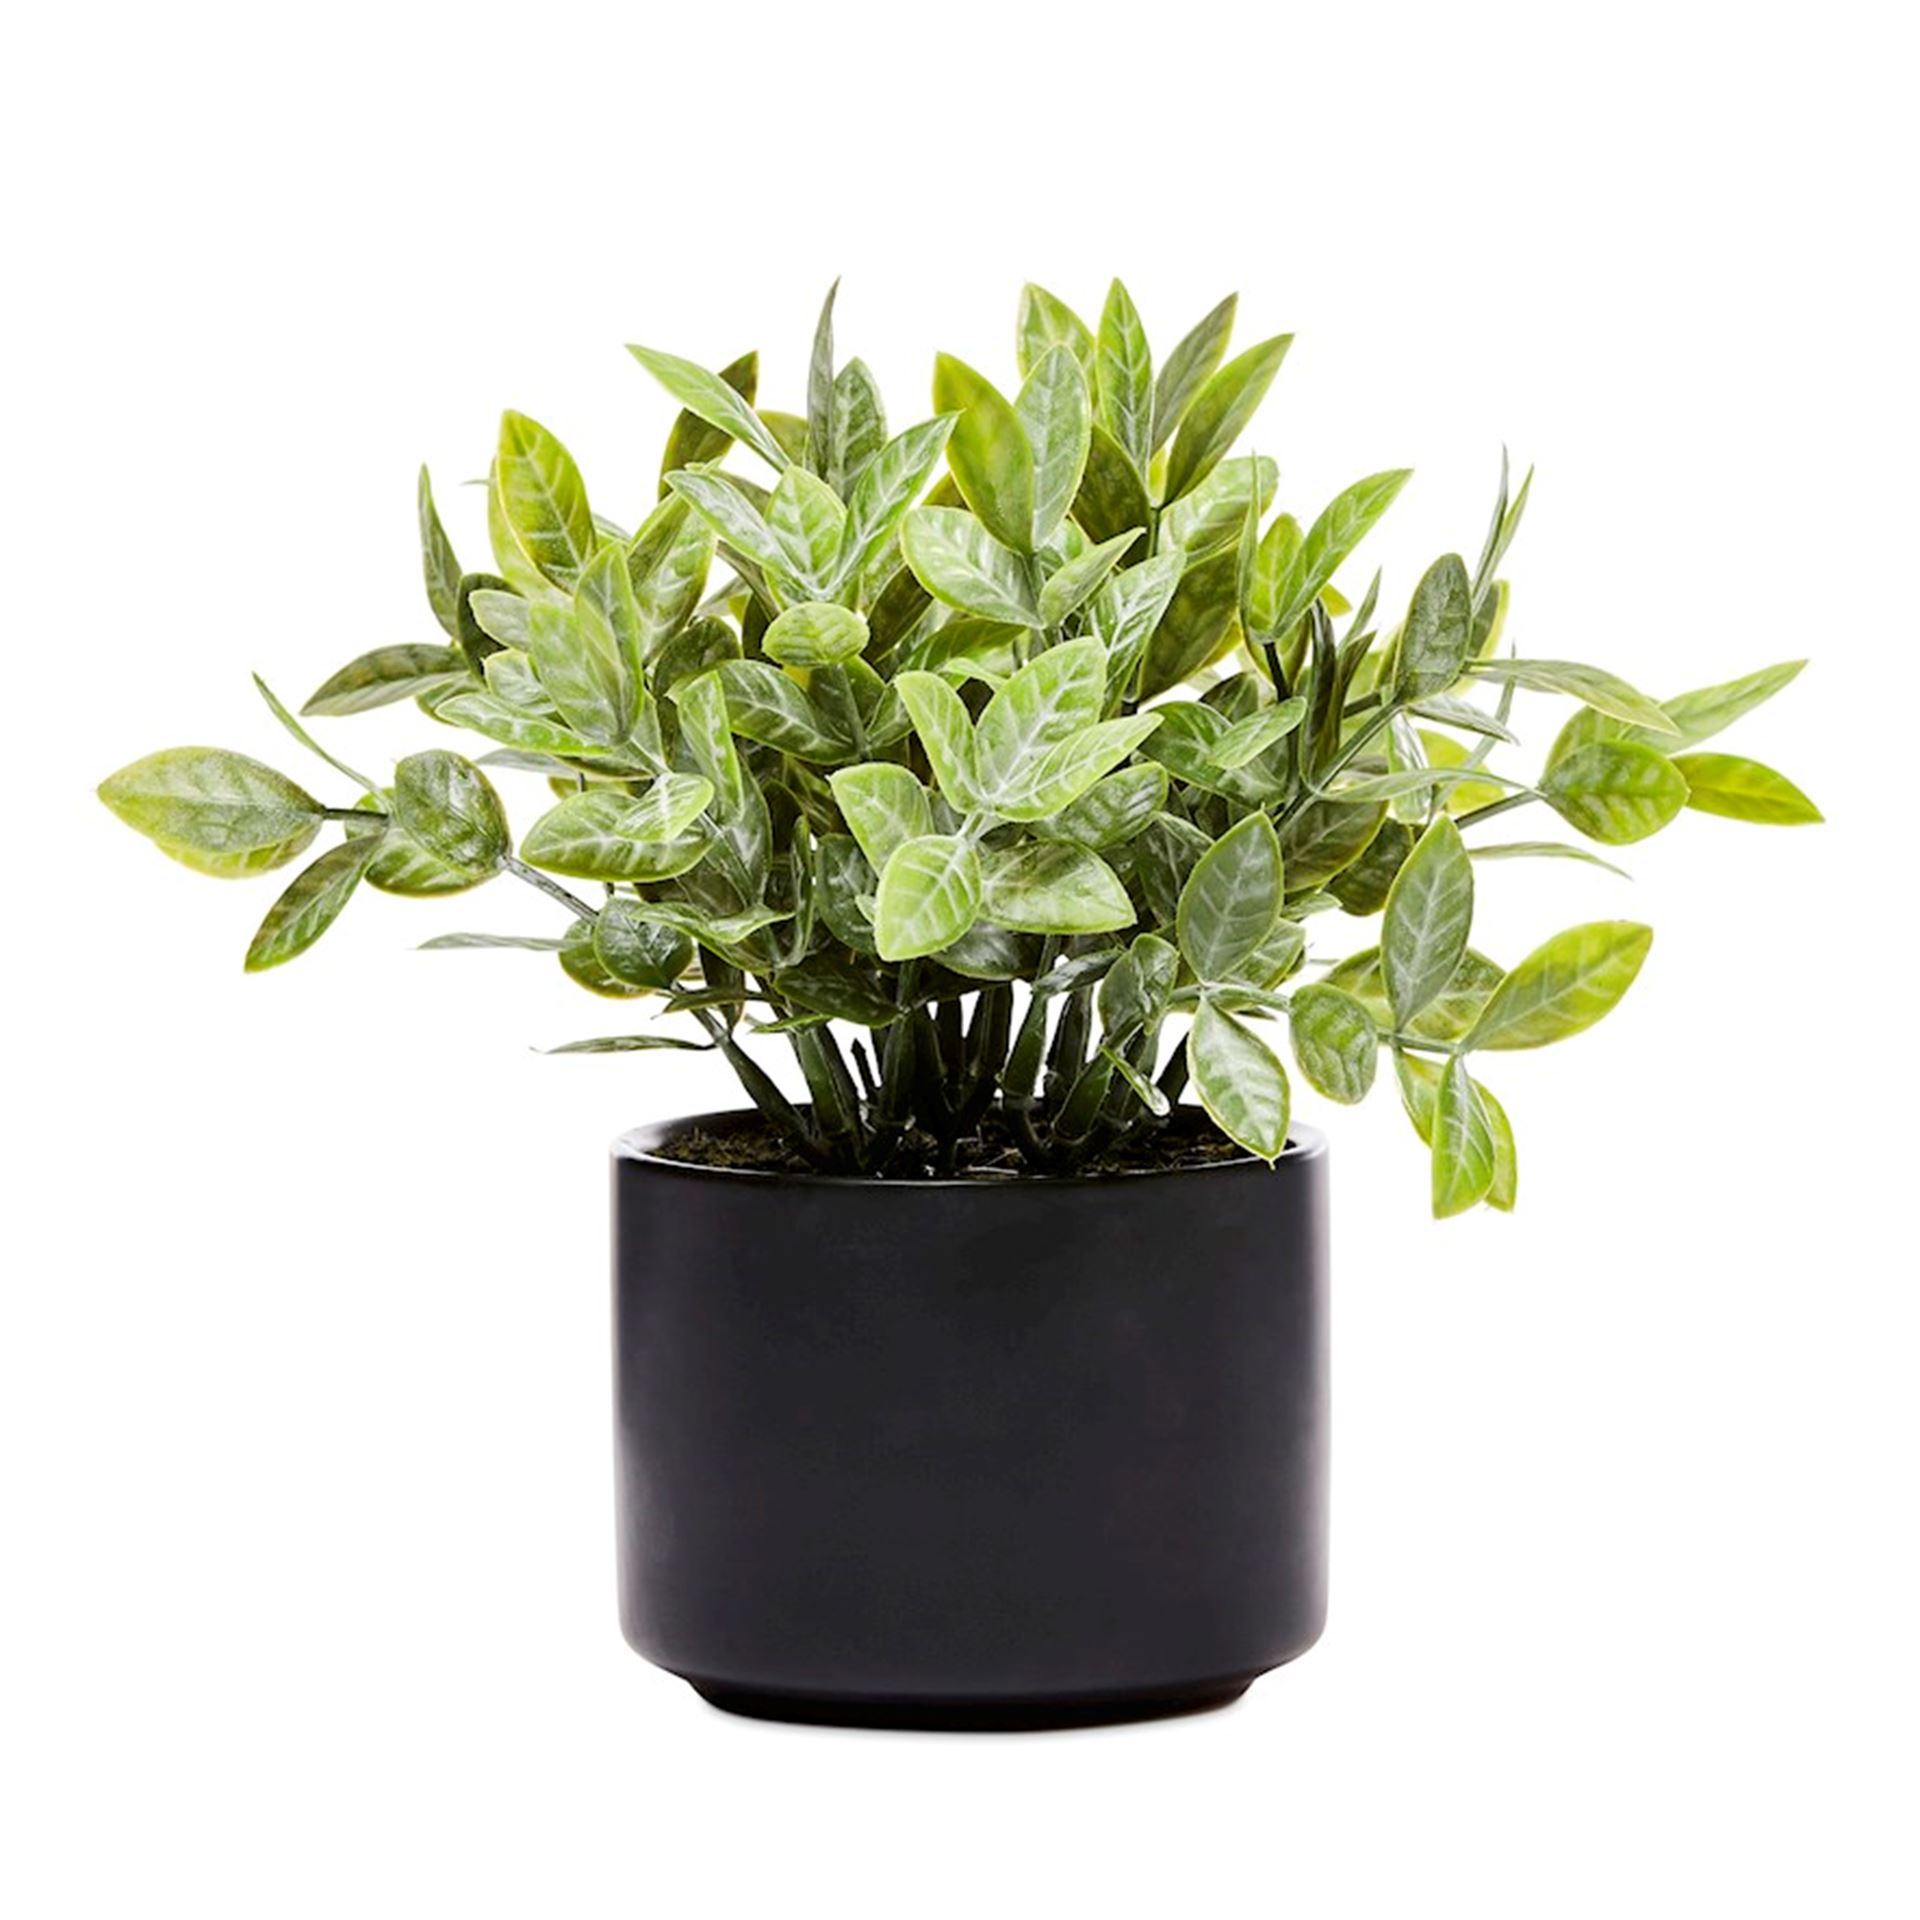 https://www.adairs.com.au/globalassets/13.-ecommerce/03.-product-images/2022_images/homewares/plants--stems/53056_green_zoom_2.jpg?width=1920&mode=crop&heightratio=1&quality=80